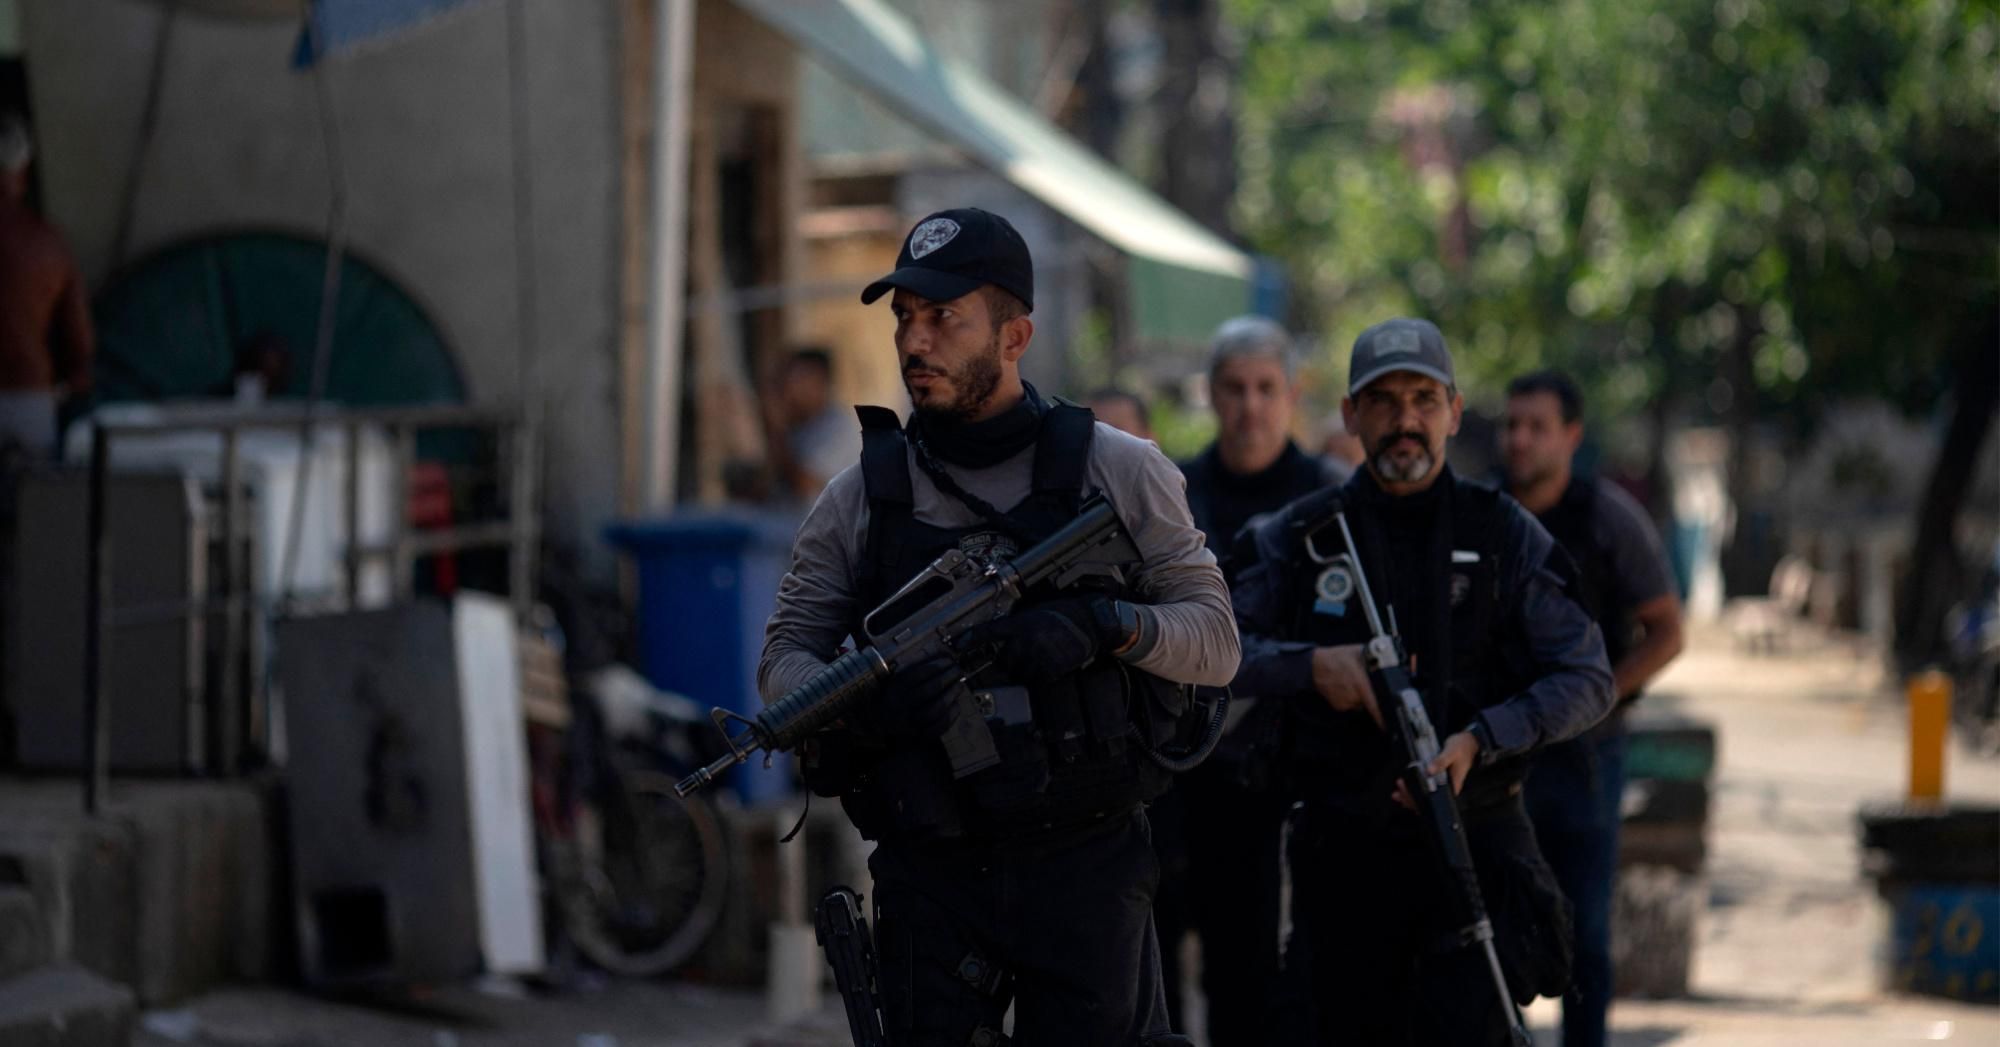 Police officers carry out a deadly raid at the Jacarezinho favela in Rio de Janeiro, Brazil on May 6, 2021.